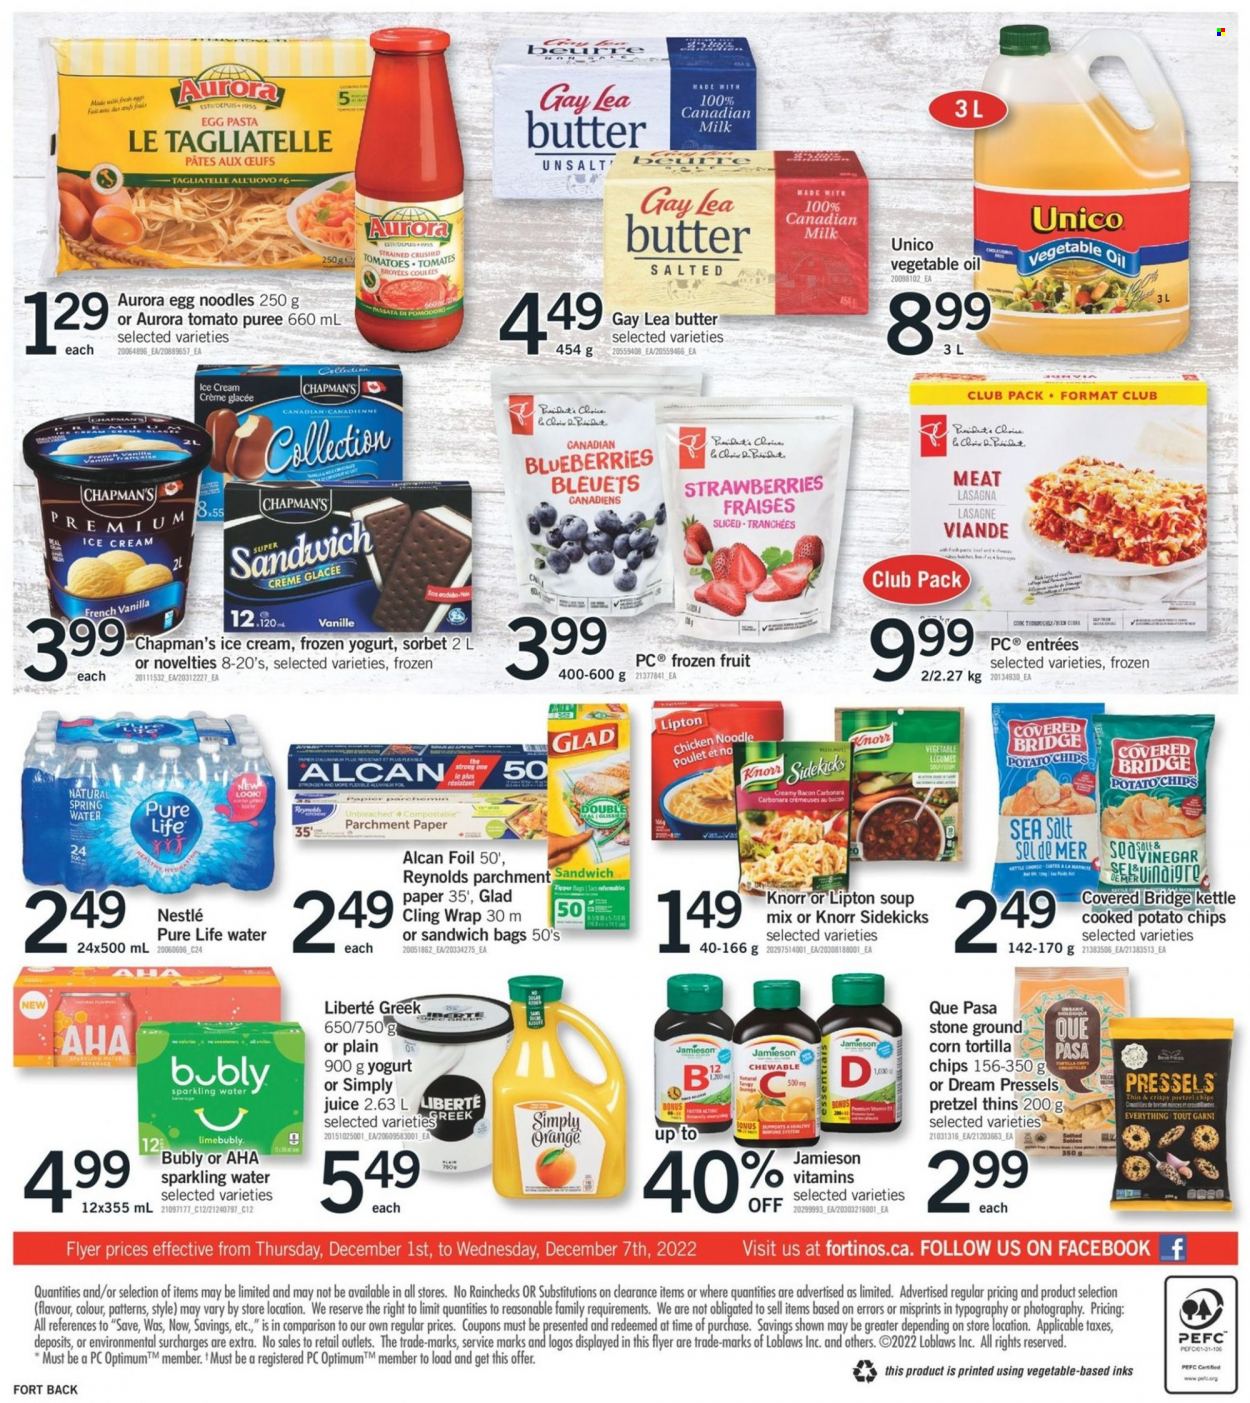 thumbnail - Fortinos Flyer - December 01, 2022 - December 07, 2022 - Sales products - pretzels, tomatoes, blueberries, strawberries, soup mix, soup, pasta, noodles, lasagna meal, bacon, Président, yoghurt, milk, butter, ice cream, tortilla chips, potato chips, Thins, crushed tomatoes, tomato sauce, tomato puree, egg noodles, vegetable oil, oil, juice, spring water, sparkling water, Pure Life Water, paper, Nestlé, Lipton, Knorr. Page 2.